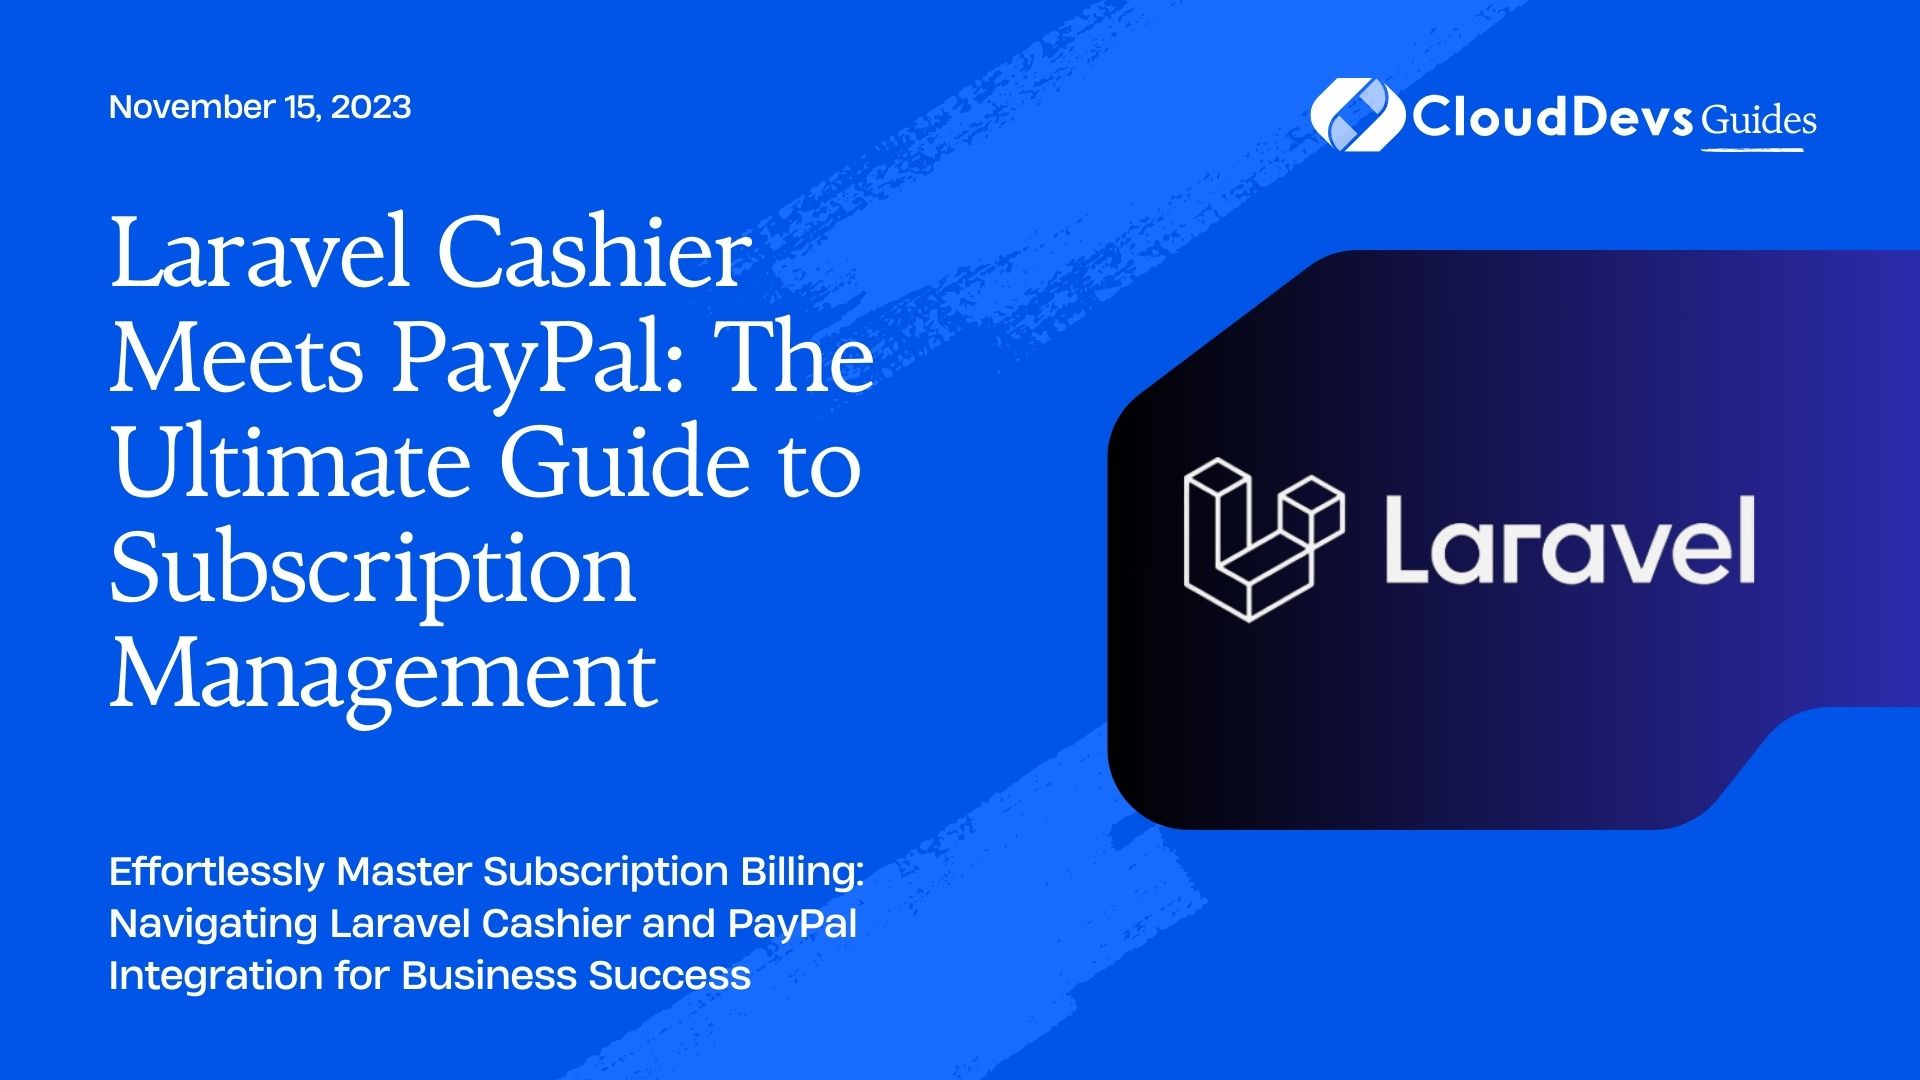 Laravel Cashier Meets PayPal: The Ultimate Guide to Subscription Management